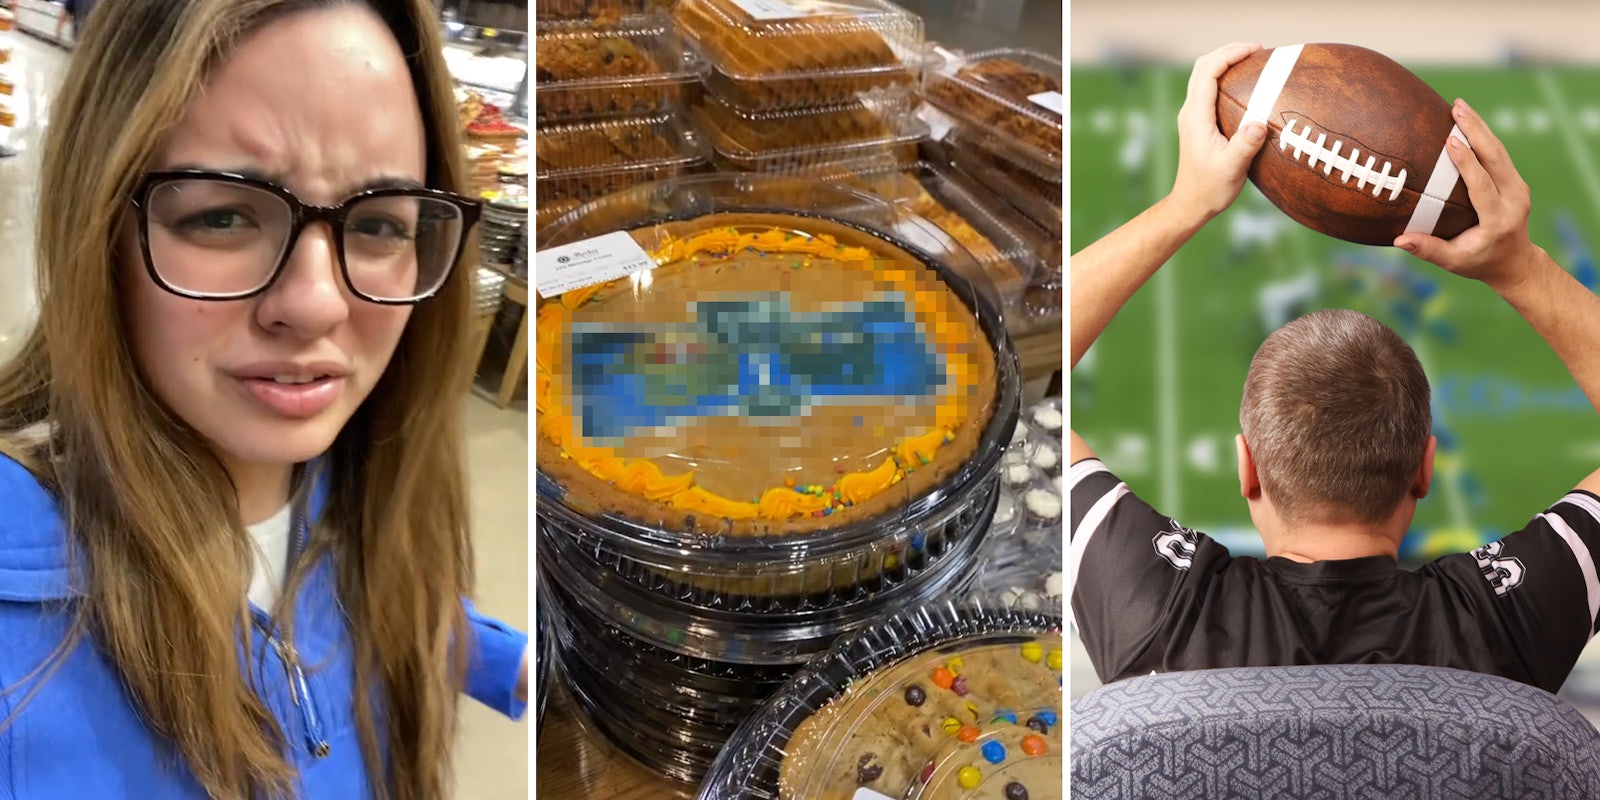 People think they found proof the Super Bowl is scripted after woman spots Super Bowl cookie cakes with 2 teams already on it at grocery store